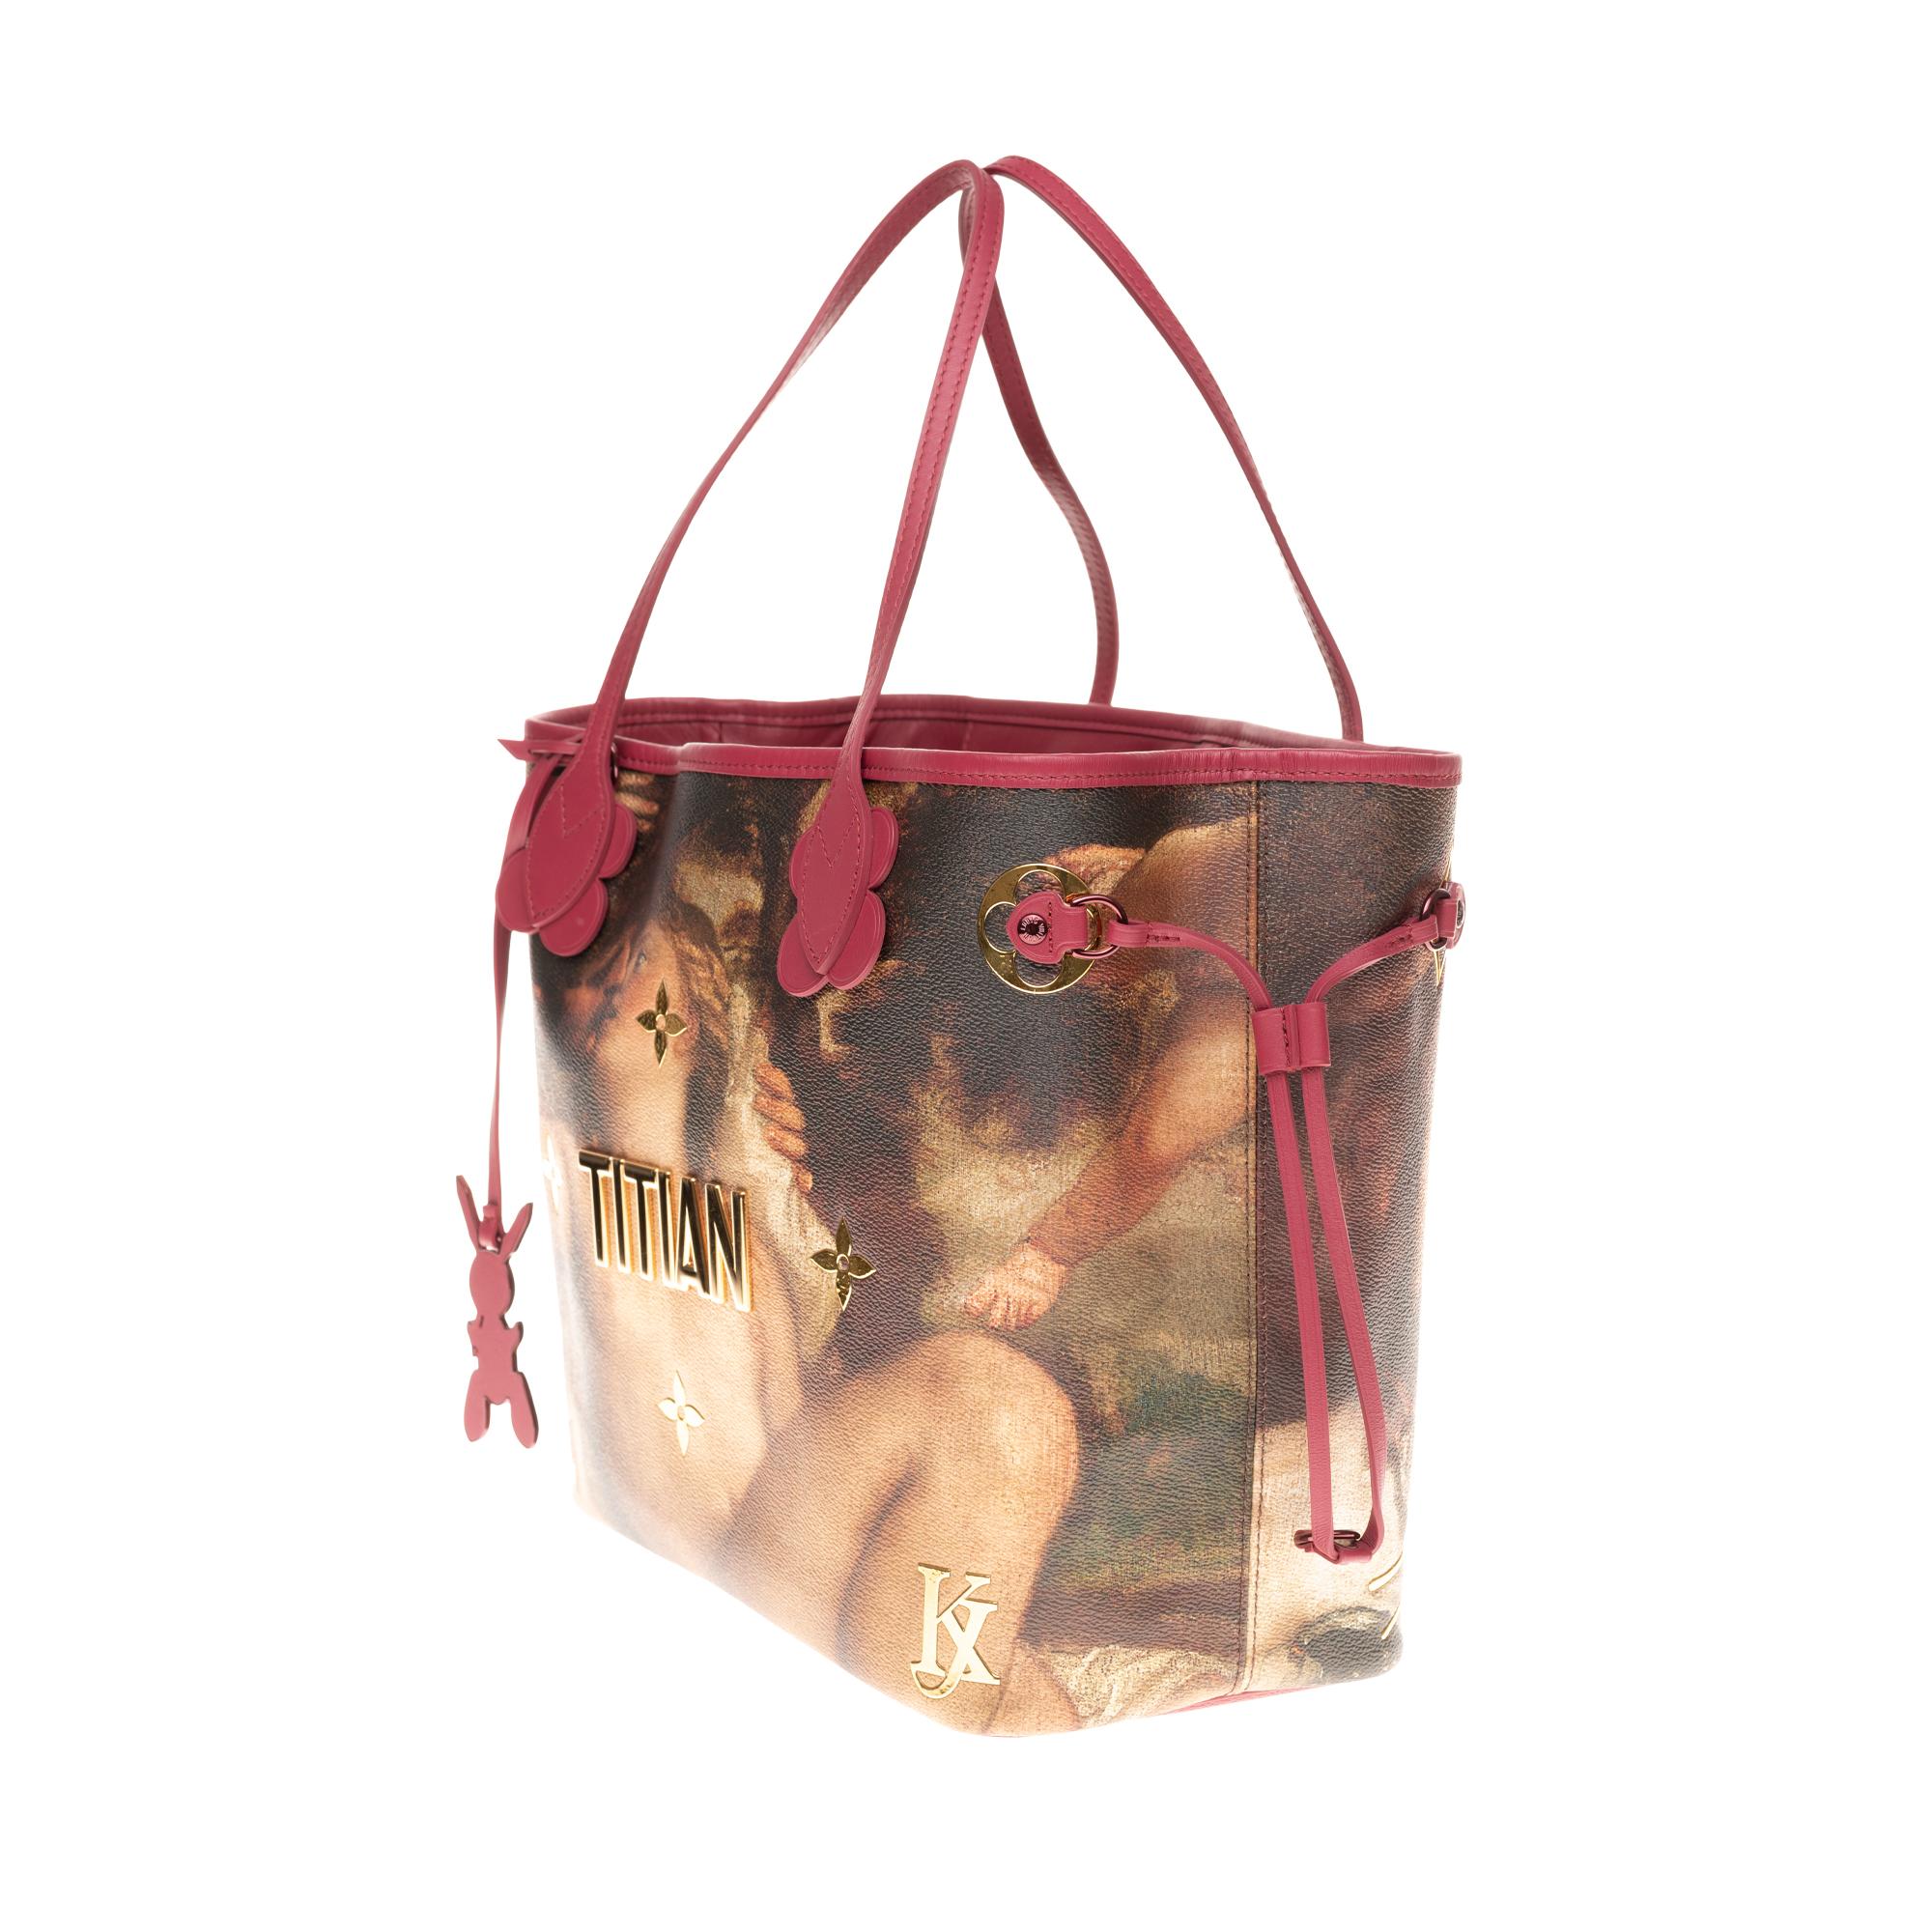 Brown Louis Vuitton Neverfull handbag limited edition  Titian by Jeff Koons 